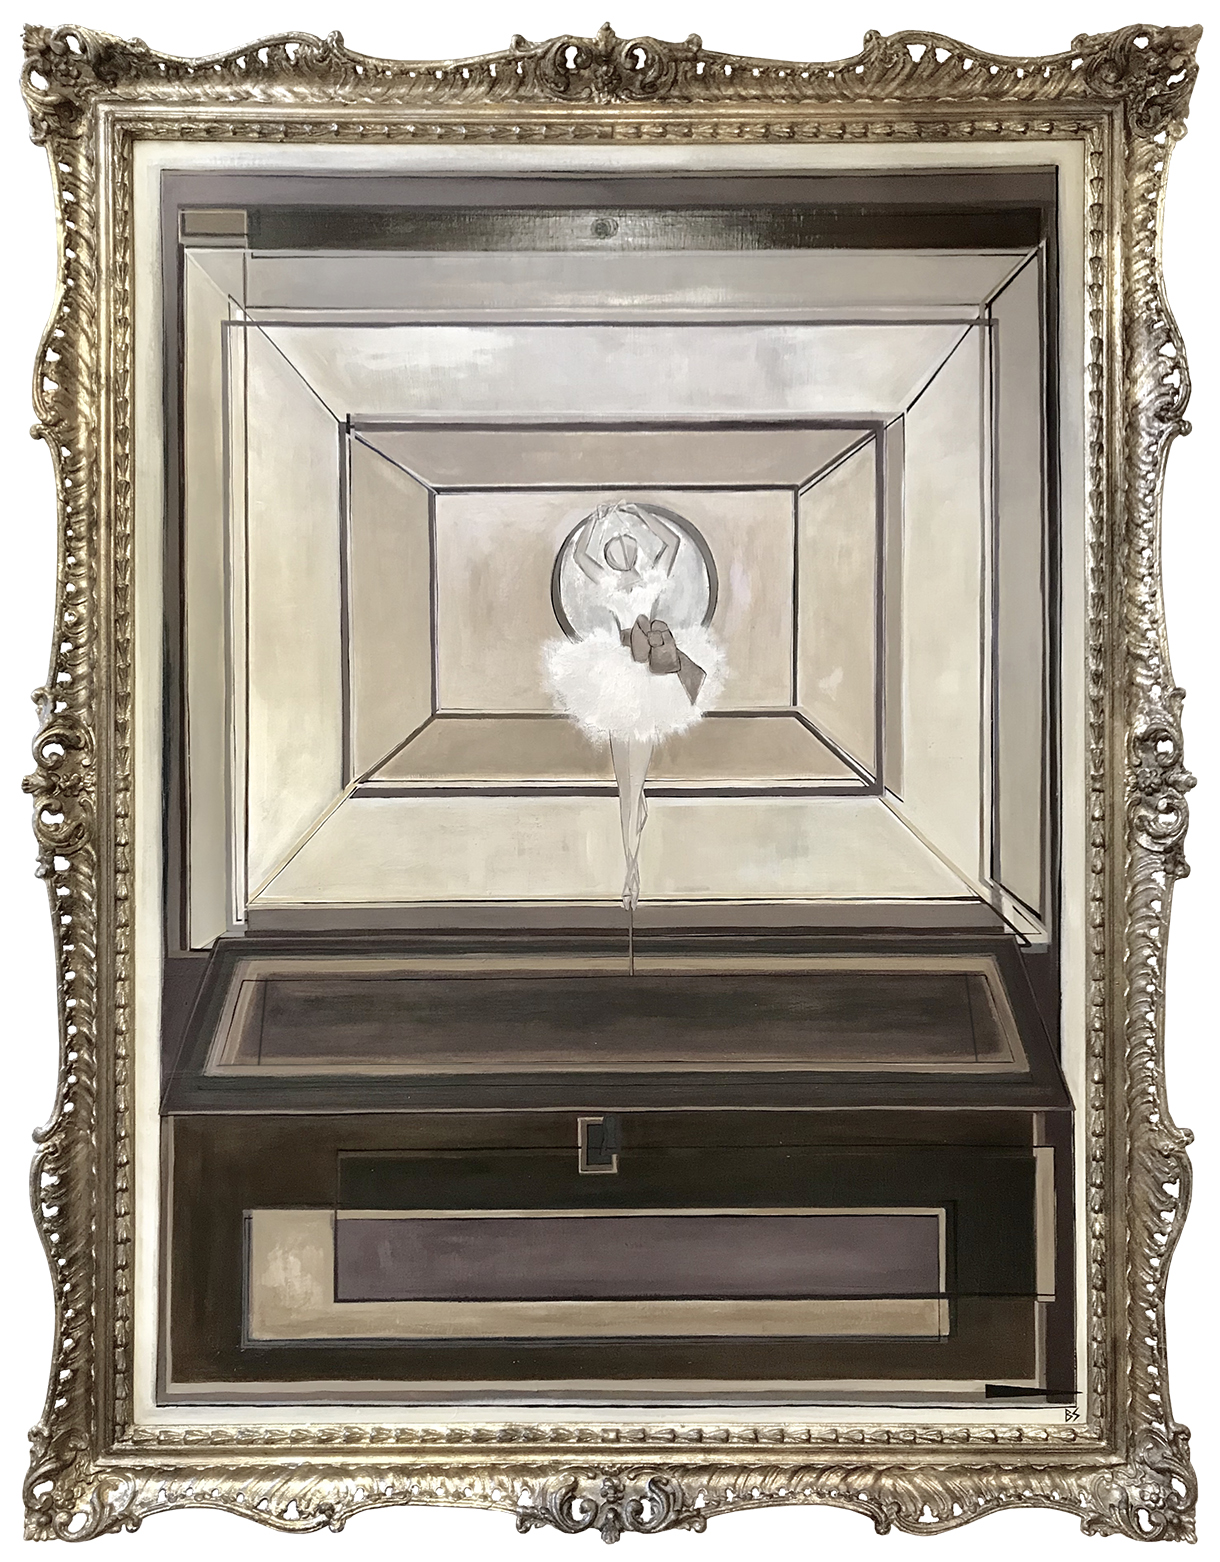 'Jewellery Box Ballerina' Oil, Acrylic & Silver Leaf on Board in Antique Gold Frame